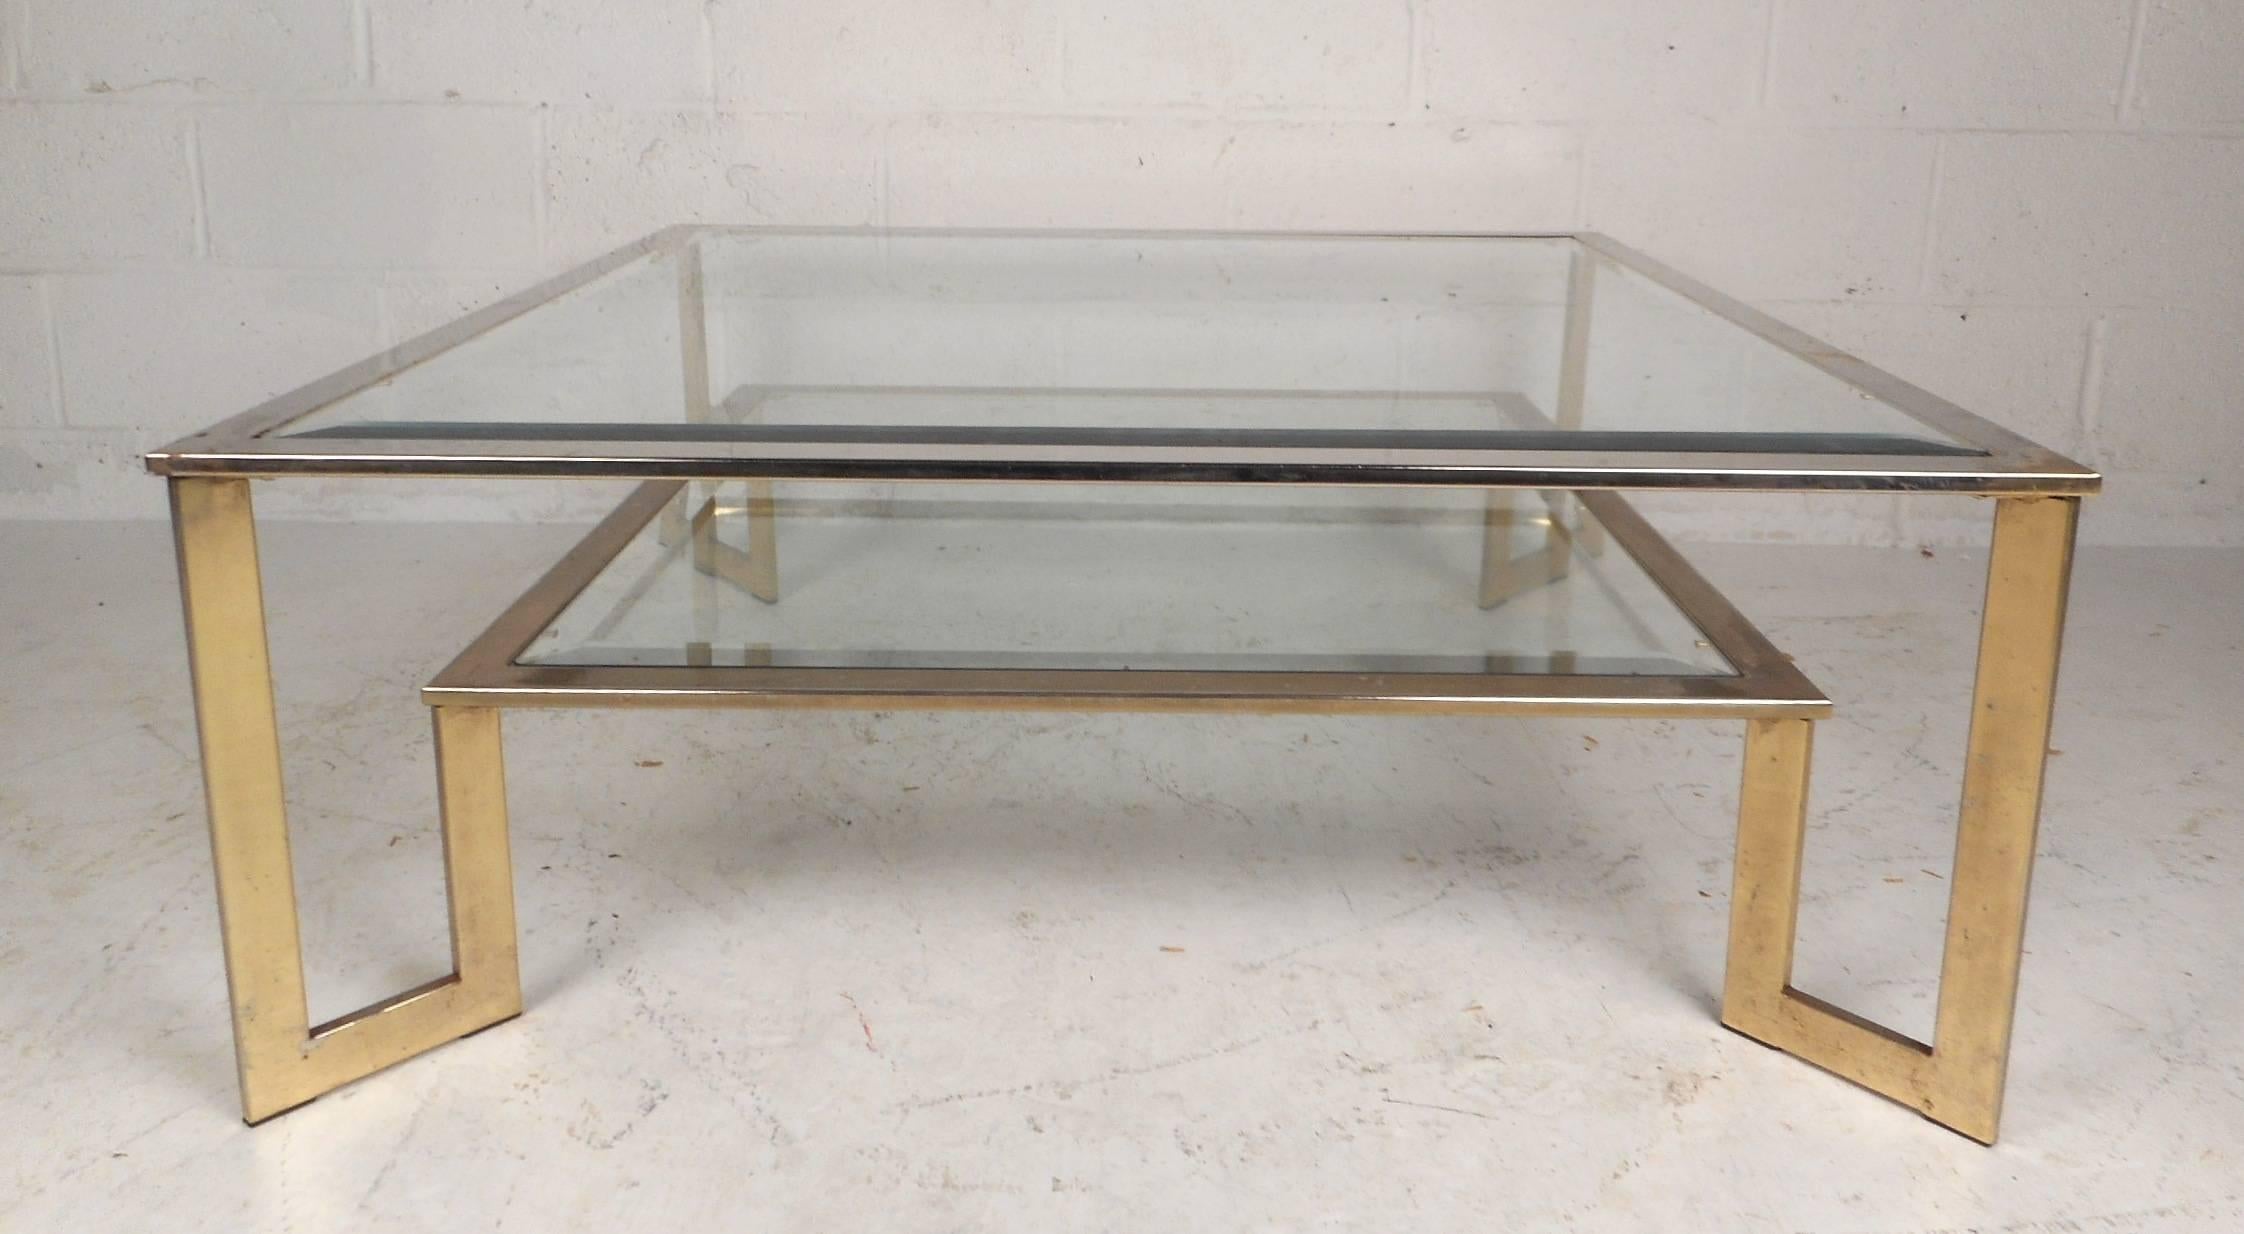 This unique vintage modern square cocktail table features a large glass top with beveled glass and a smaller lower glass tier. Sleek design with a sturdy flat bar metal frame joining both table tops. This unusual table allows for extra storage or